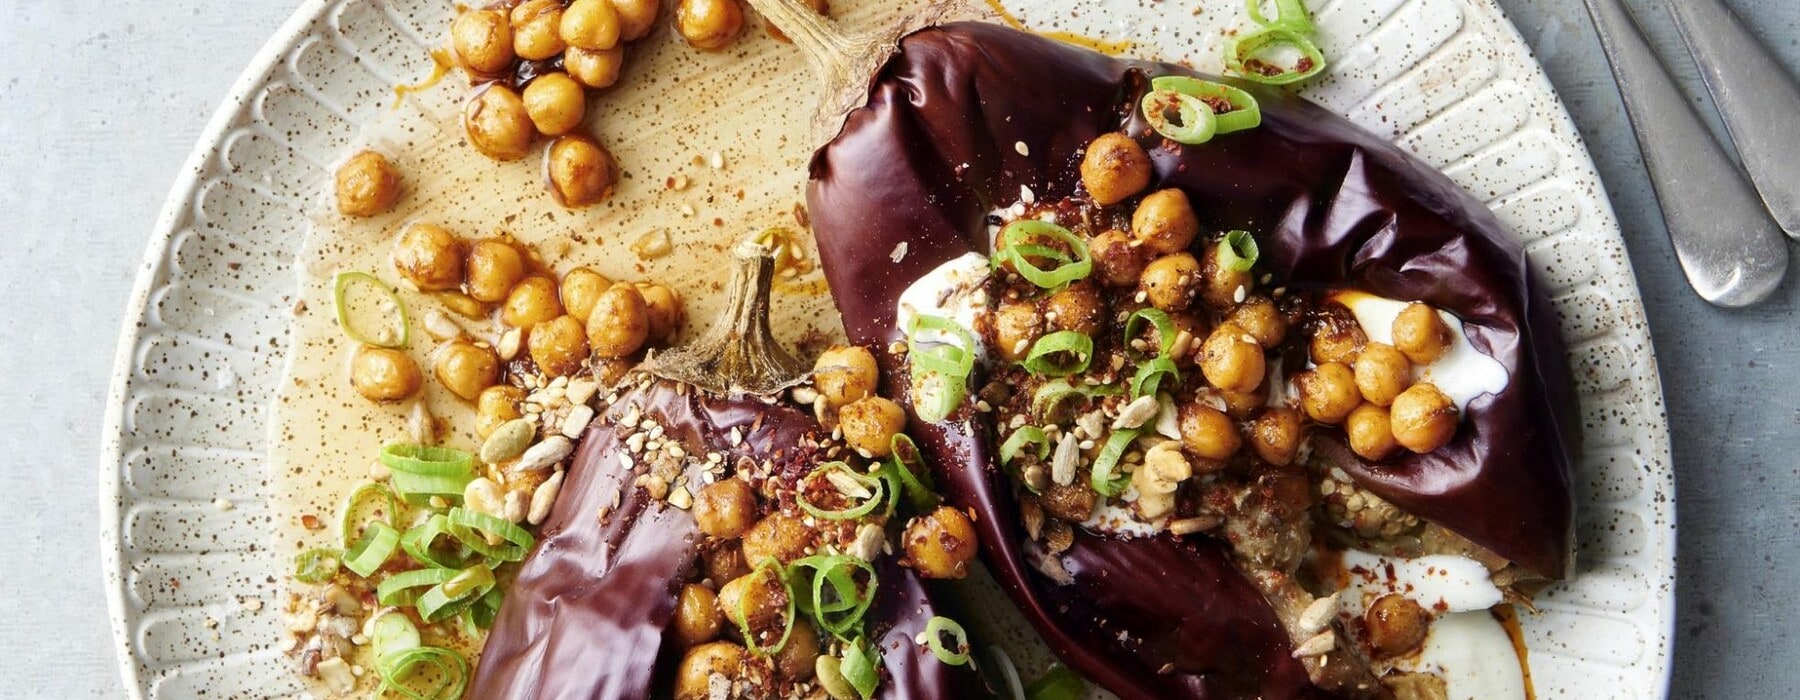 Thr1221_FoodExtract_Baked-Eggplant-with-Warm-Chickpeas-and-Yoghurt-scaled